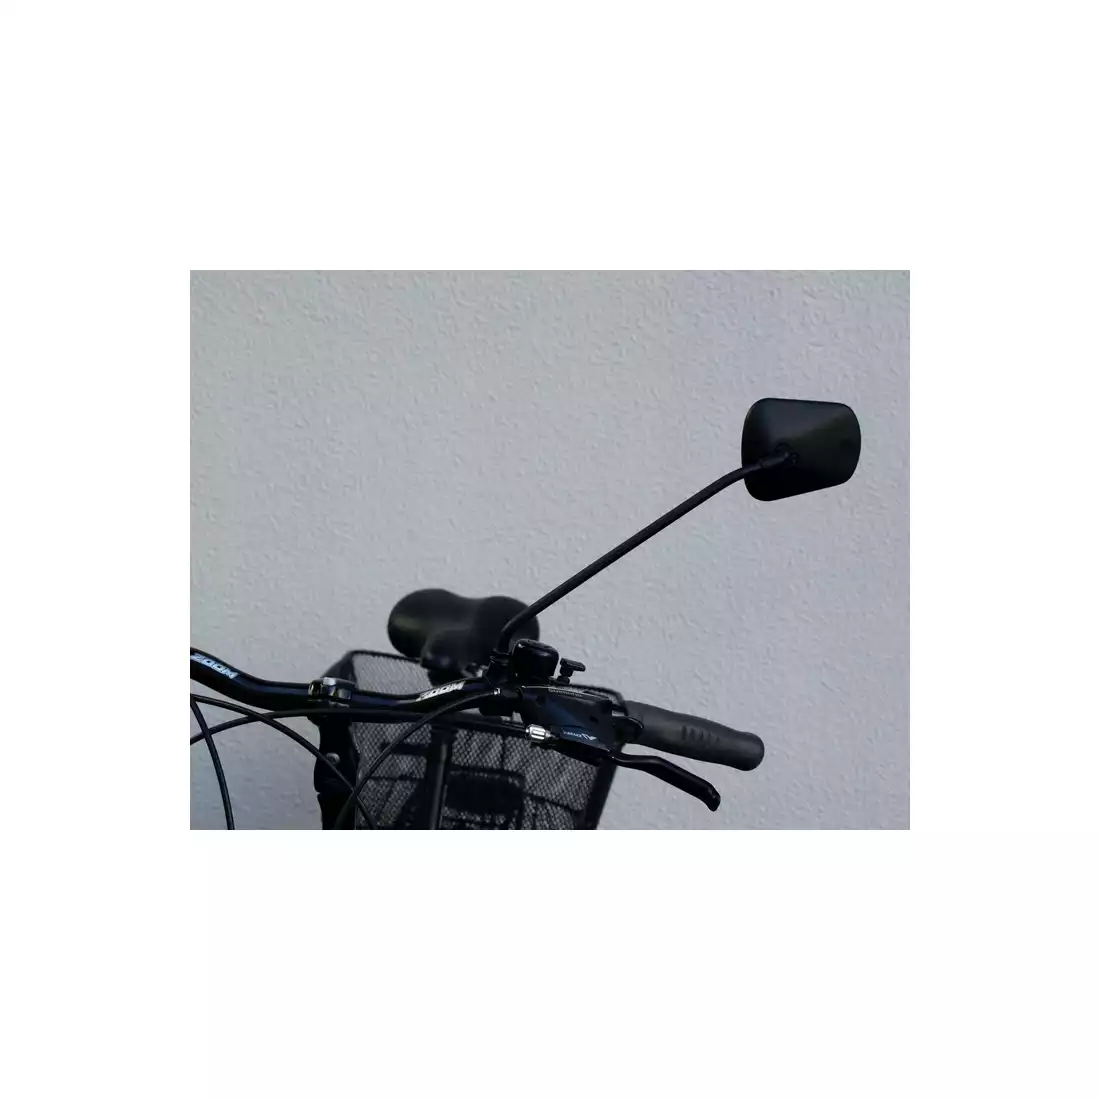 AJS PLUS bicycle mirror with a handlebar clamp, black